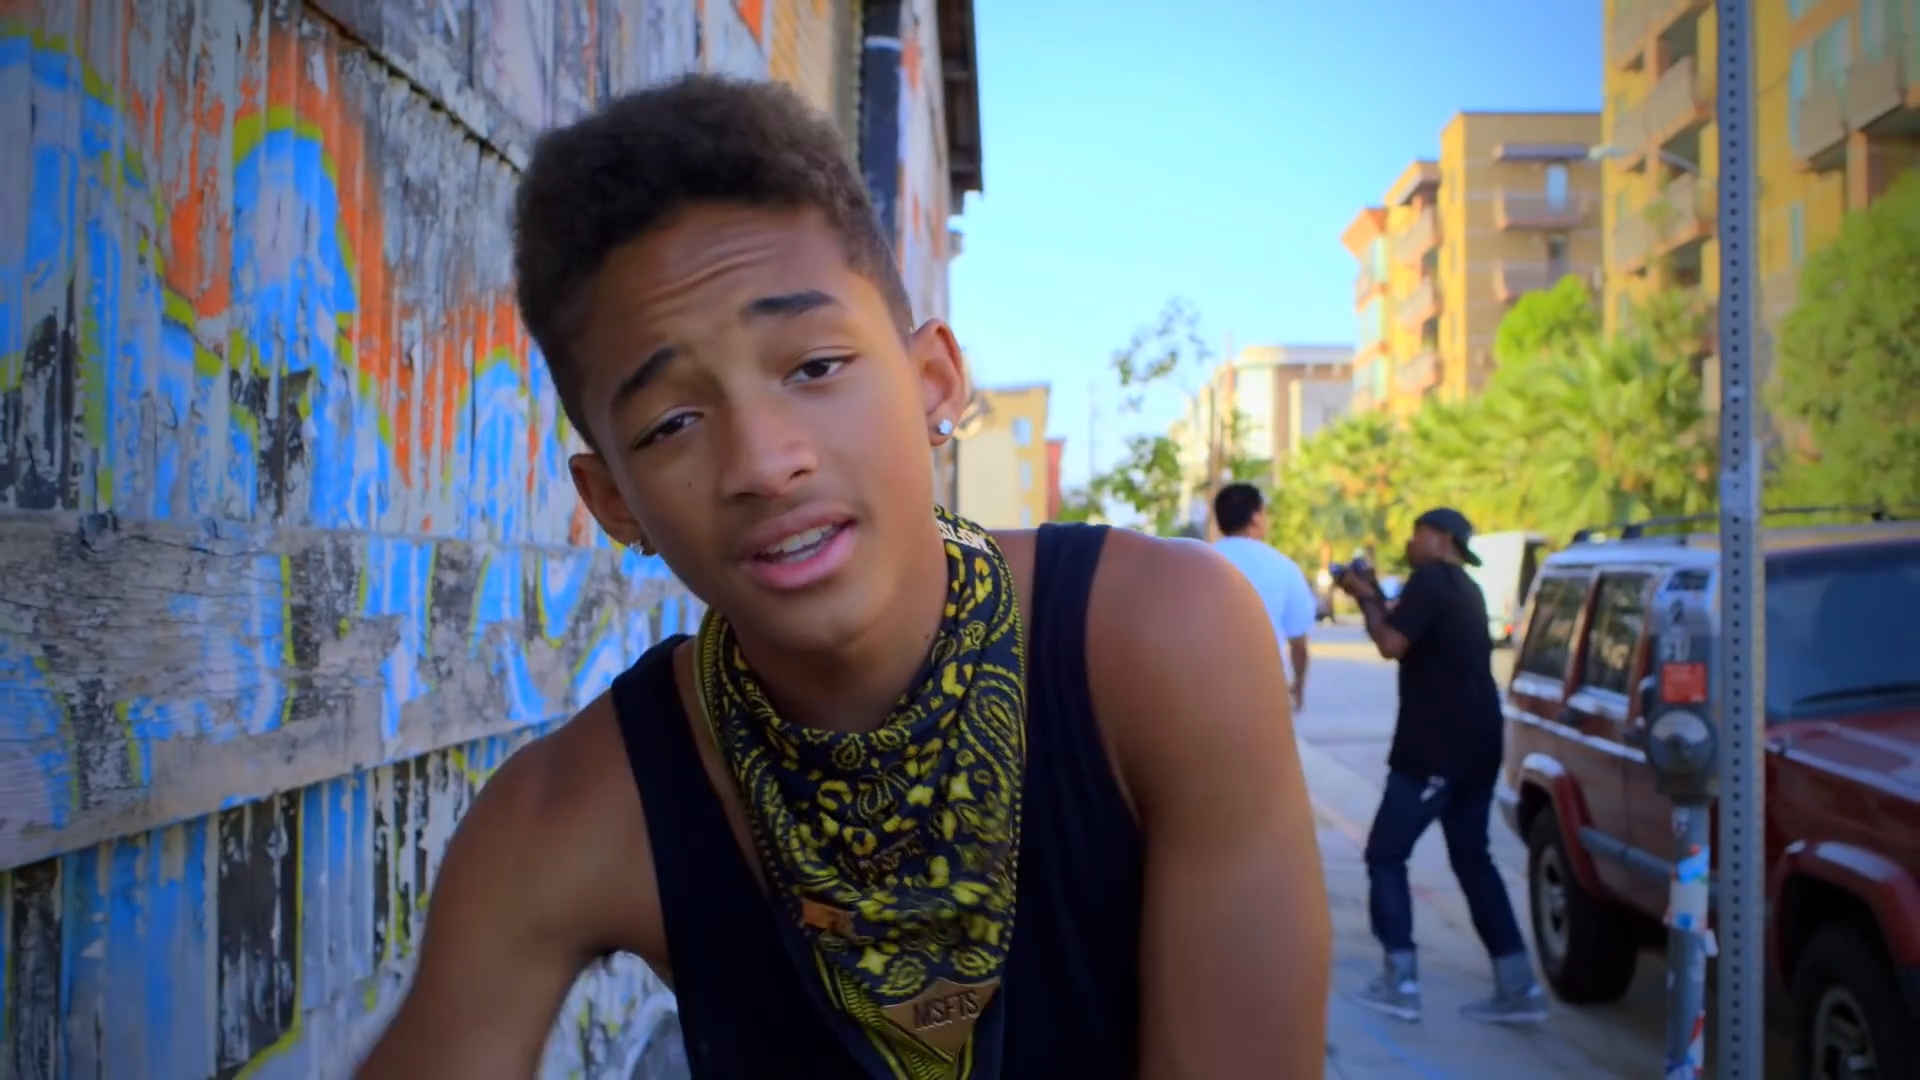 Picture Of Jaden Smith In Music Video The Coolest Jaden Smith 1643333170 Teen Idols 4 You 2517